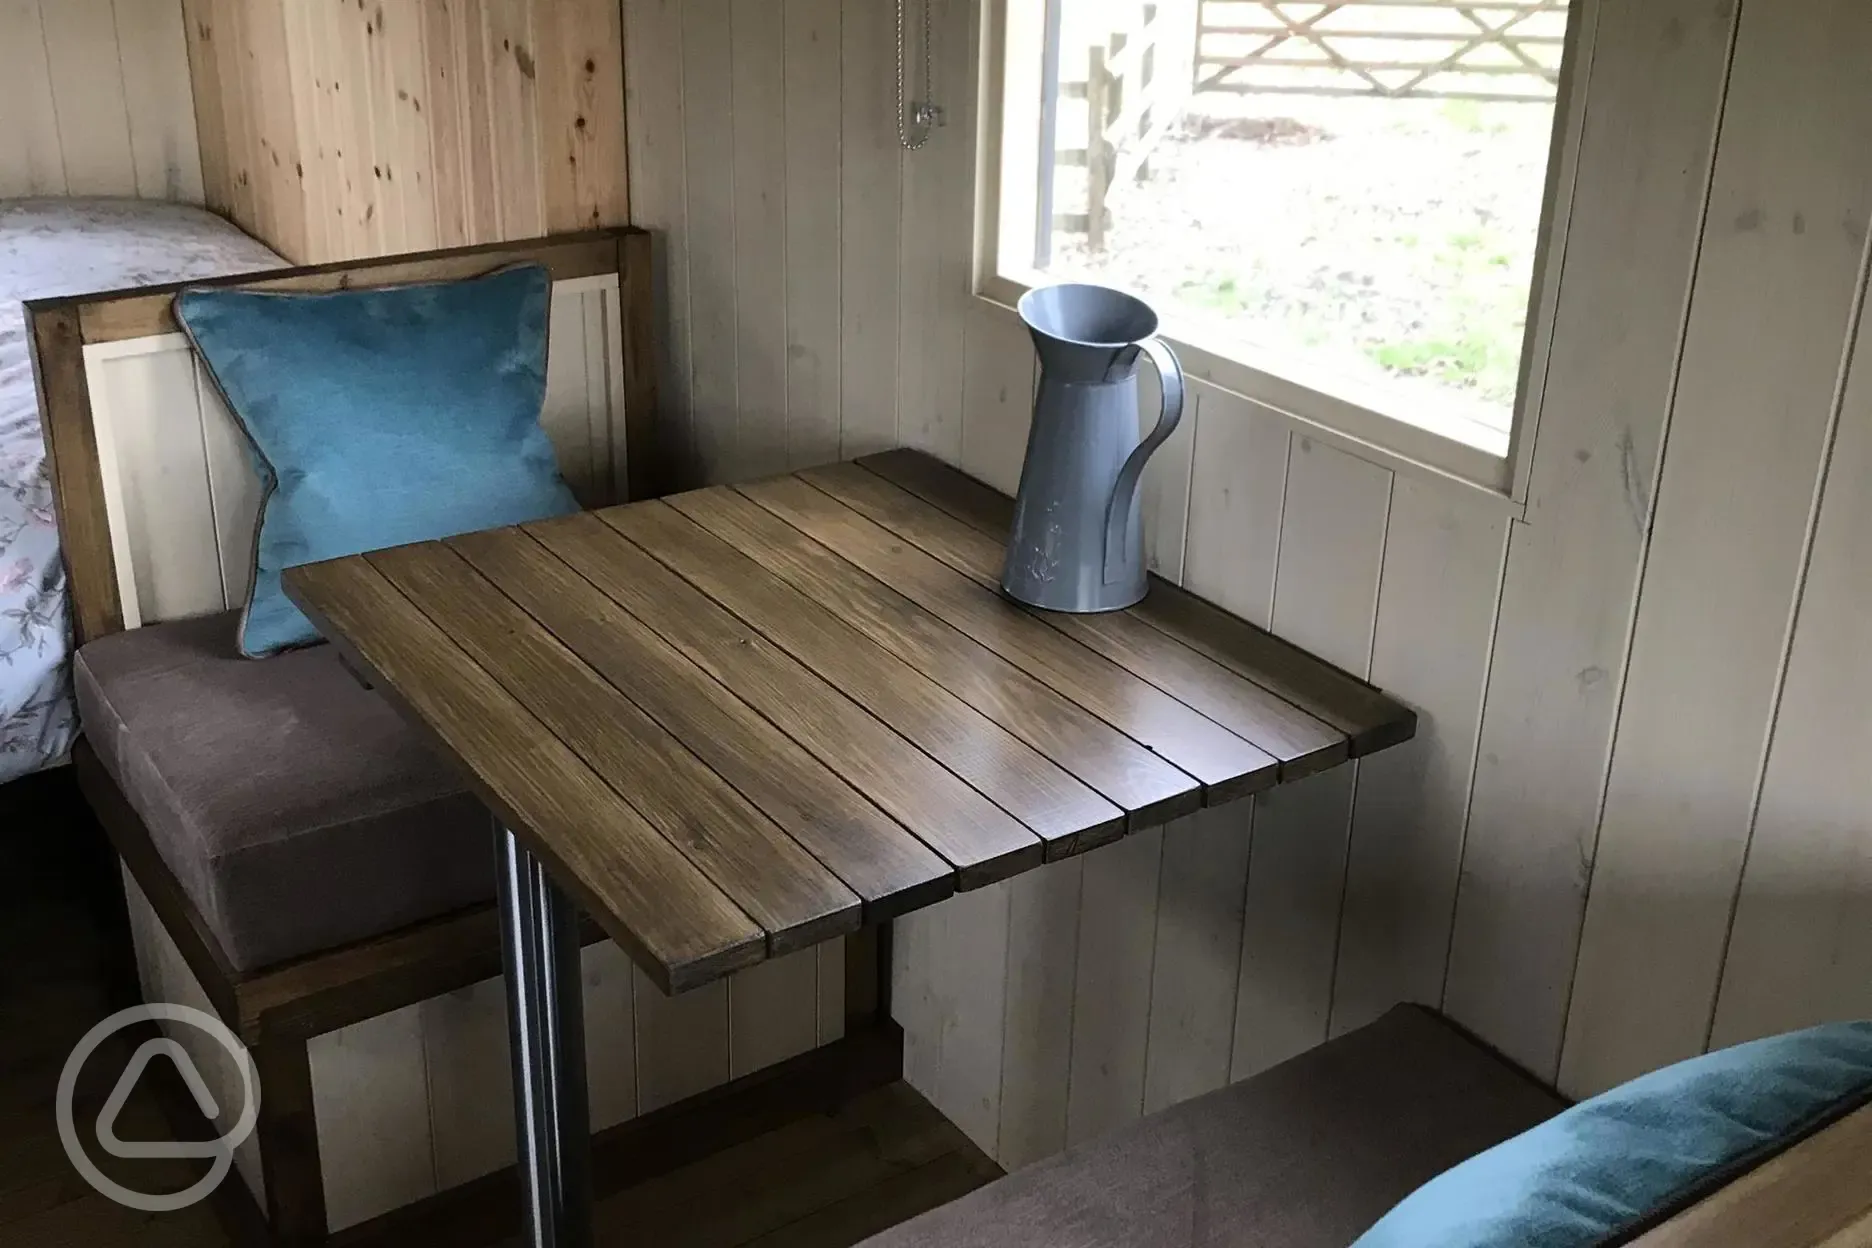 Table and Chairs that drop down to make a 6ft single bed.